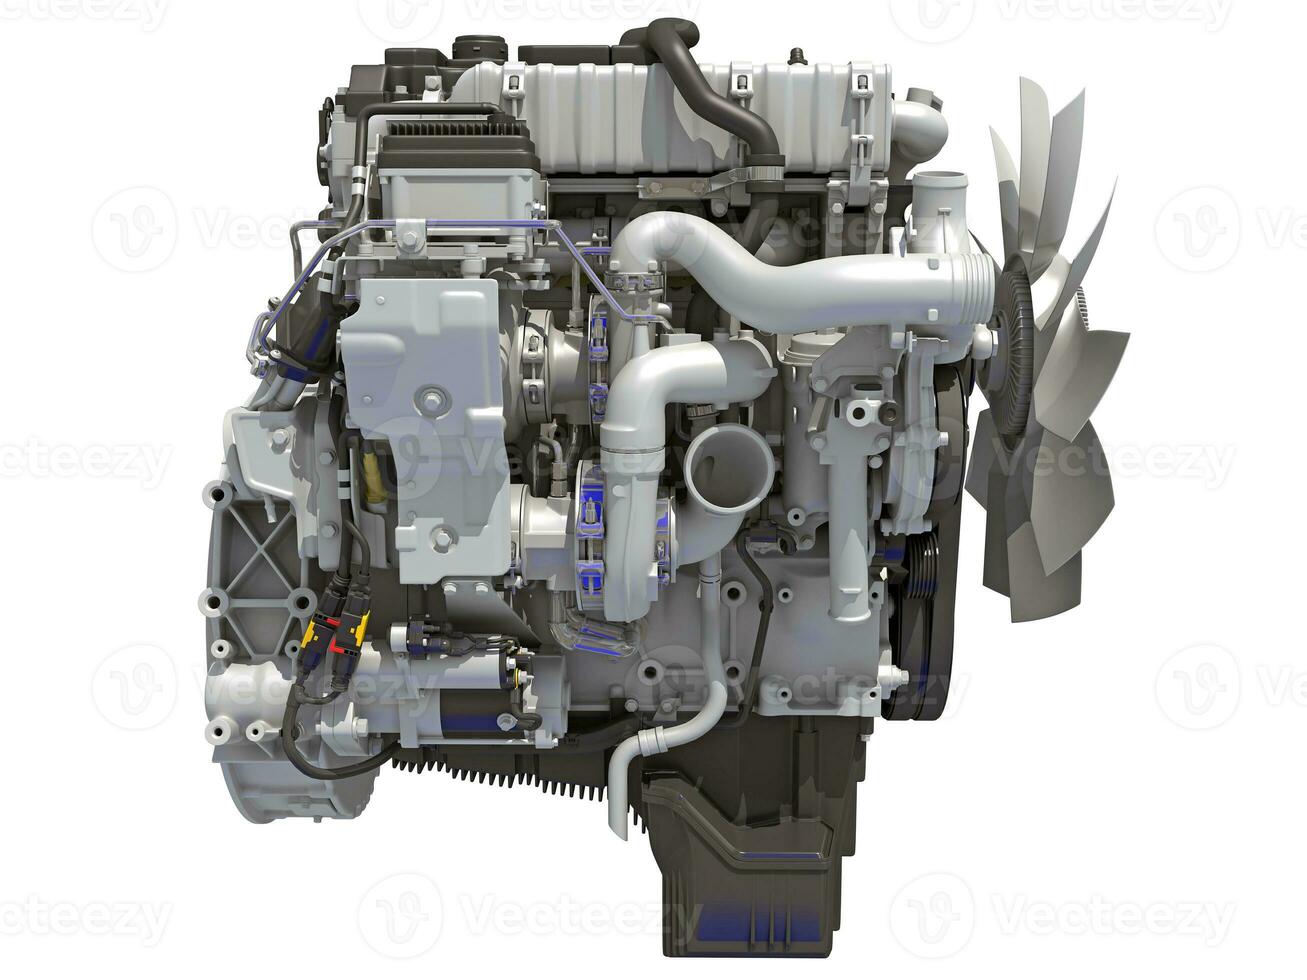 Car Engine 3D rendering on white background photo